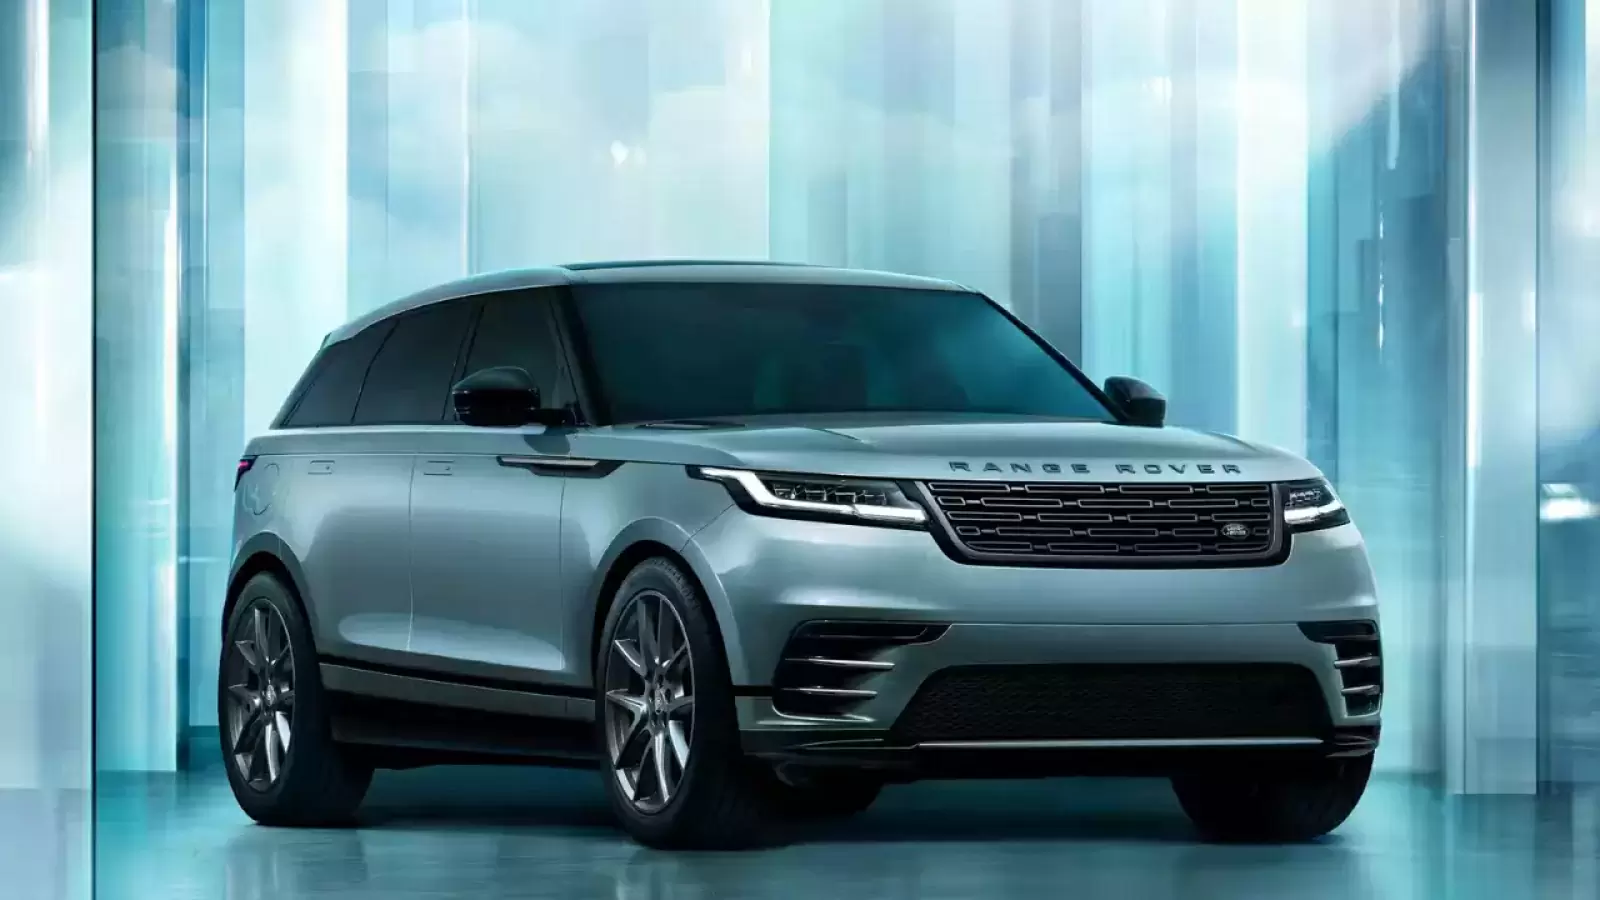 Good news for Land Rover lovers: Price of this premium car has reduced by lakhs of rupees